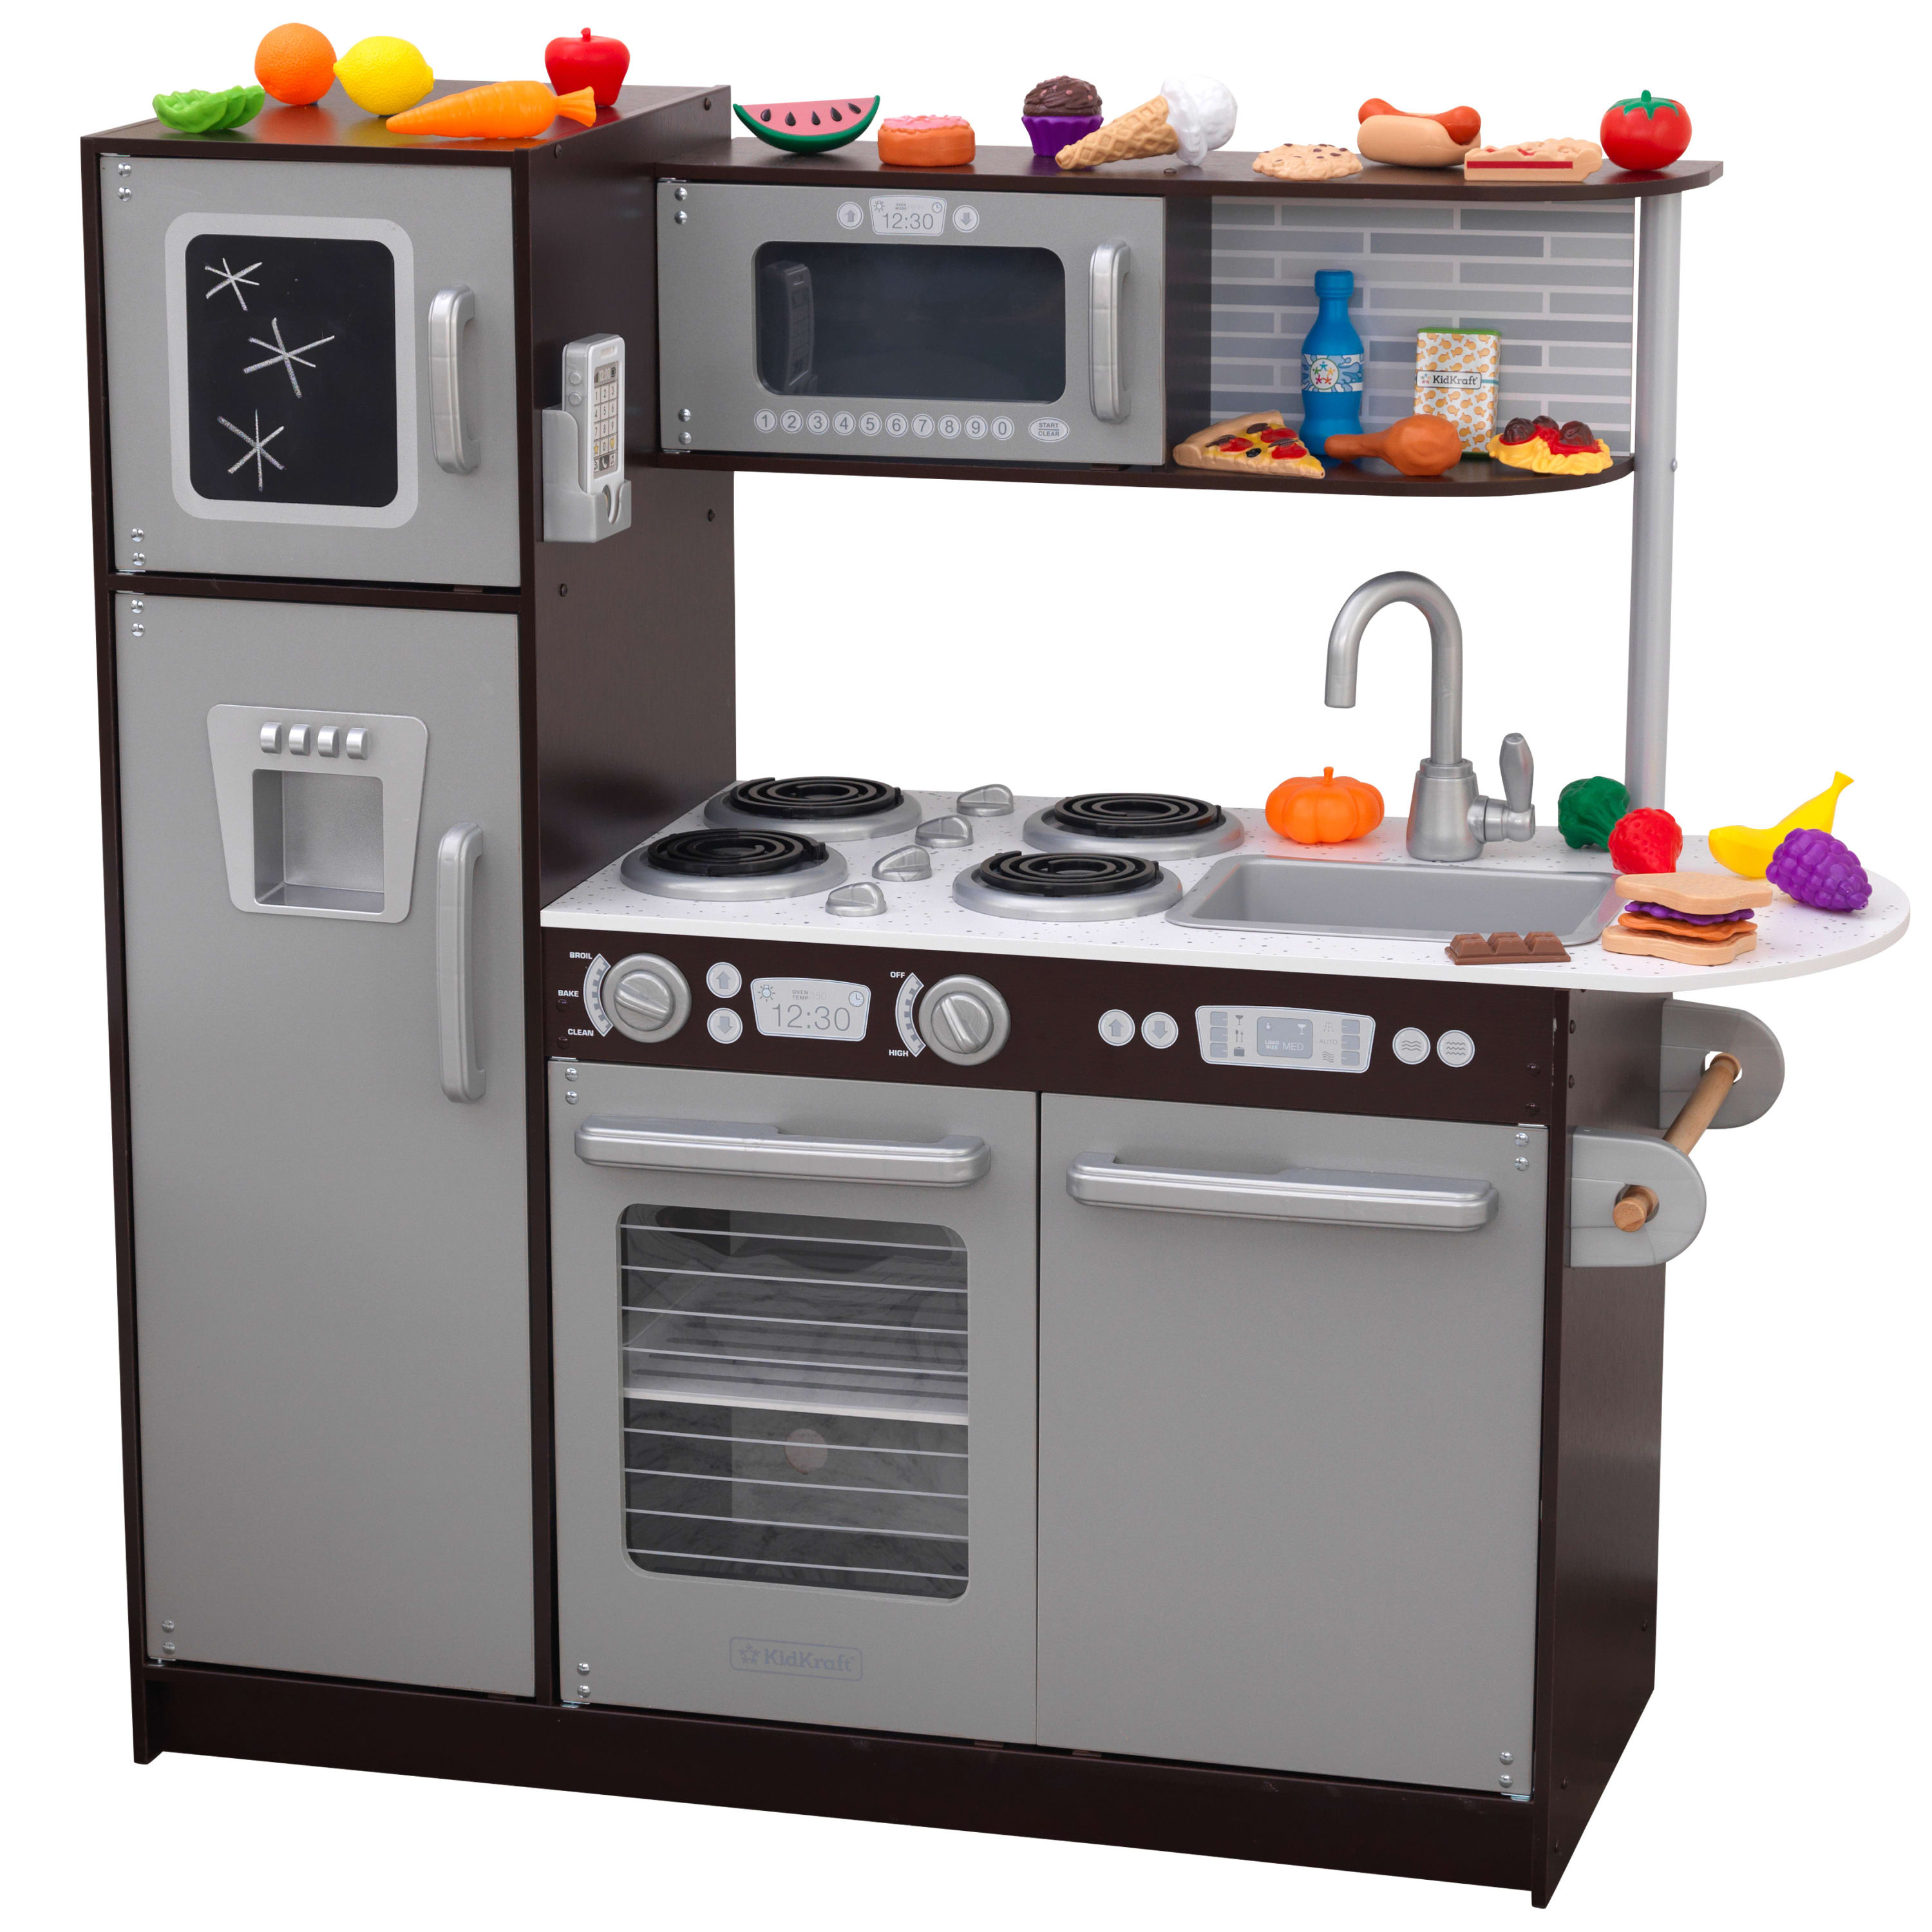 KidKraft Uptown Wooden 30-Piece Play Kitchen for Kids, Black and Silver - image 1 of 14